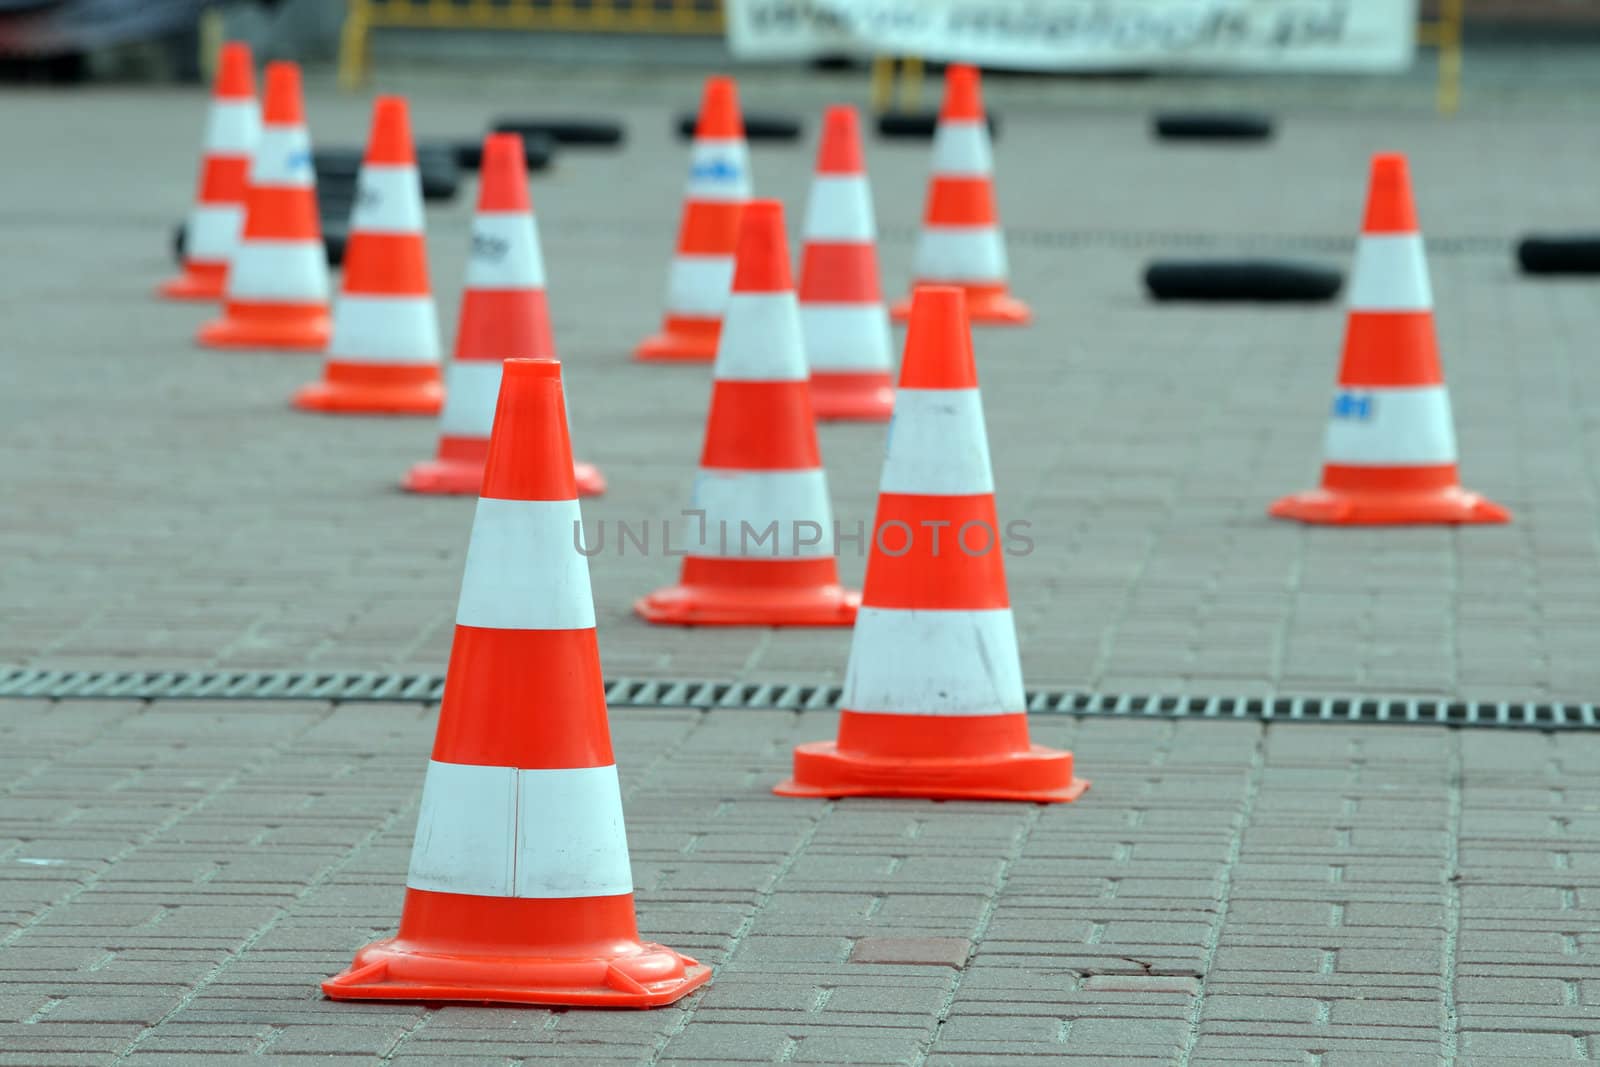 Traffic cones on the buggy race track

